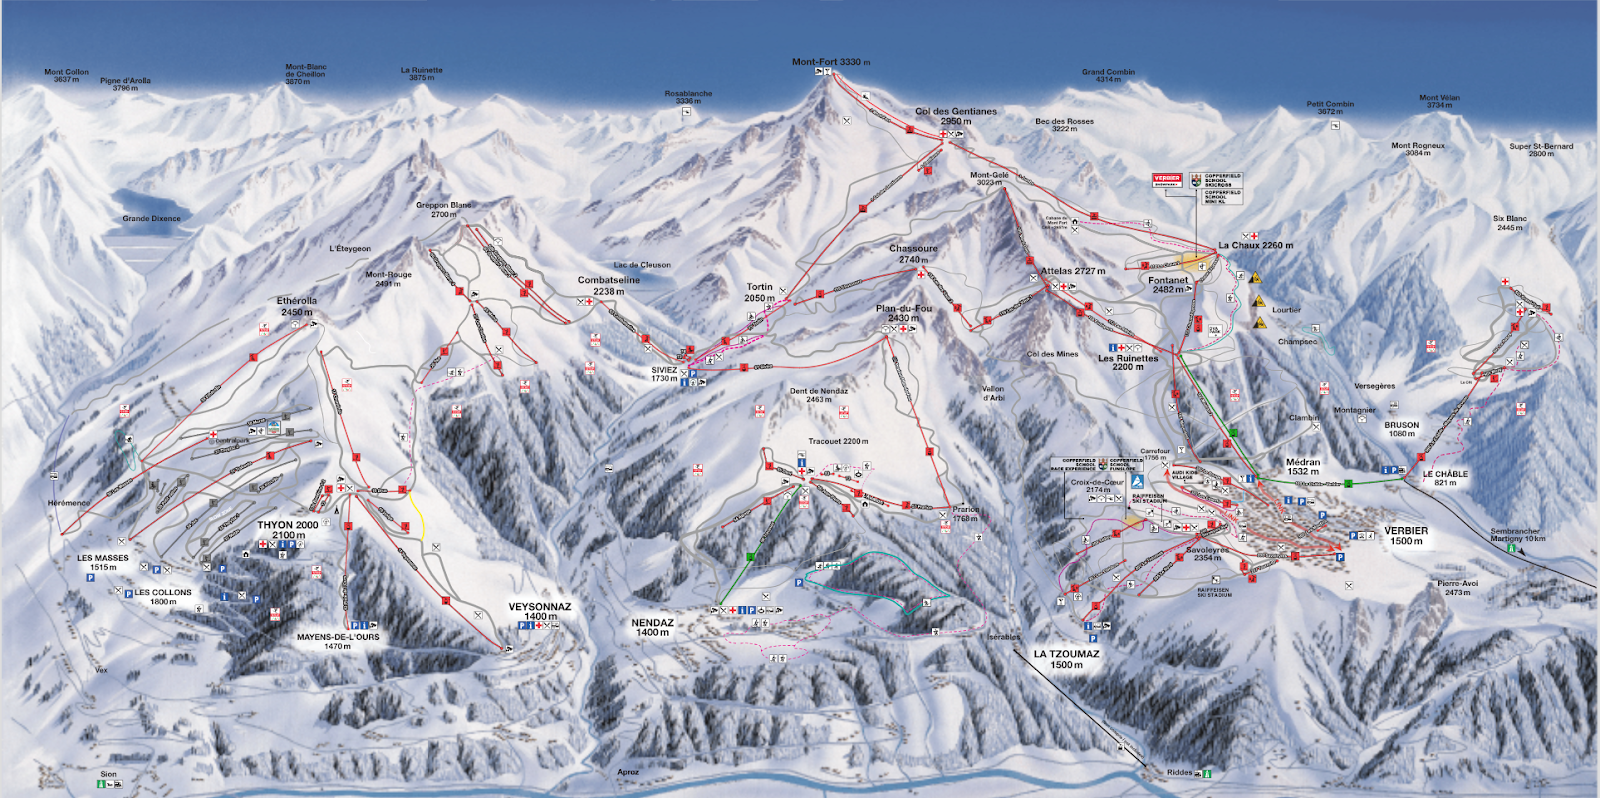 Verbier Ski Map: Detailed Mapping - Agence ABC Verbier